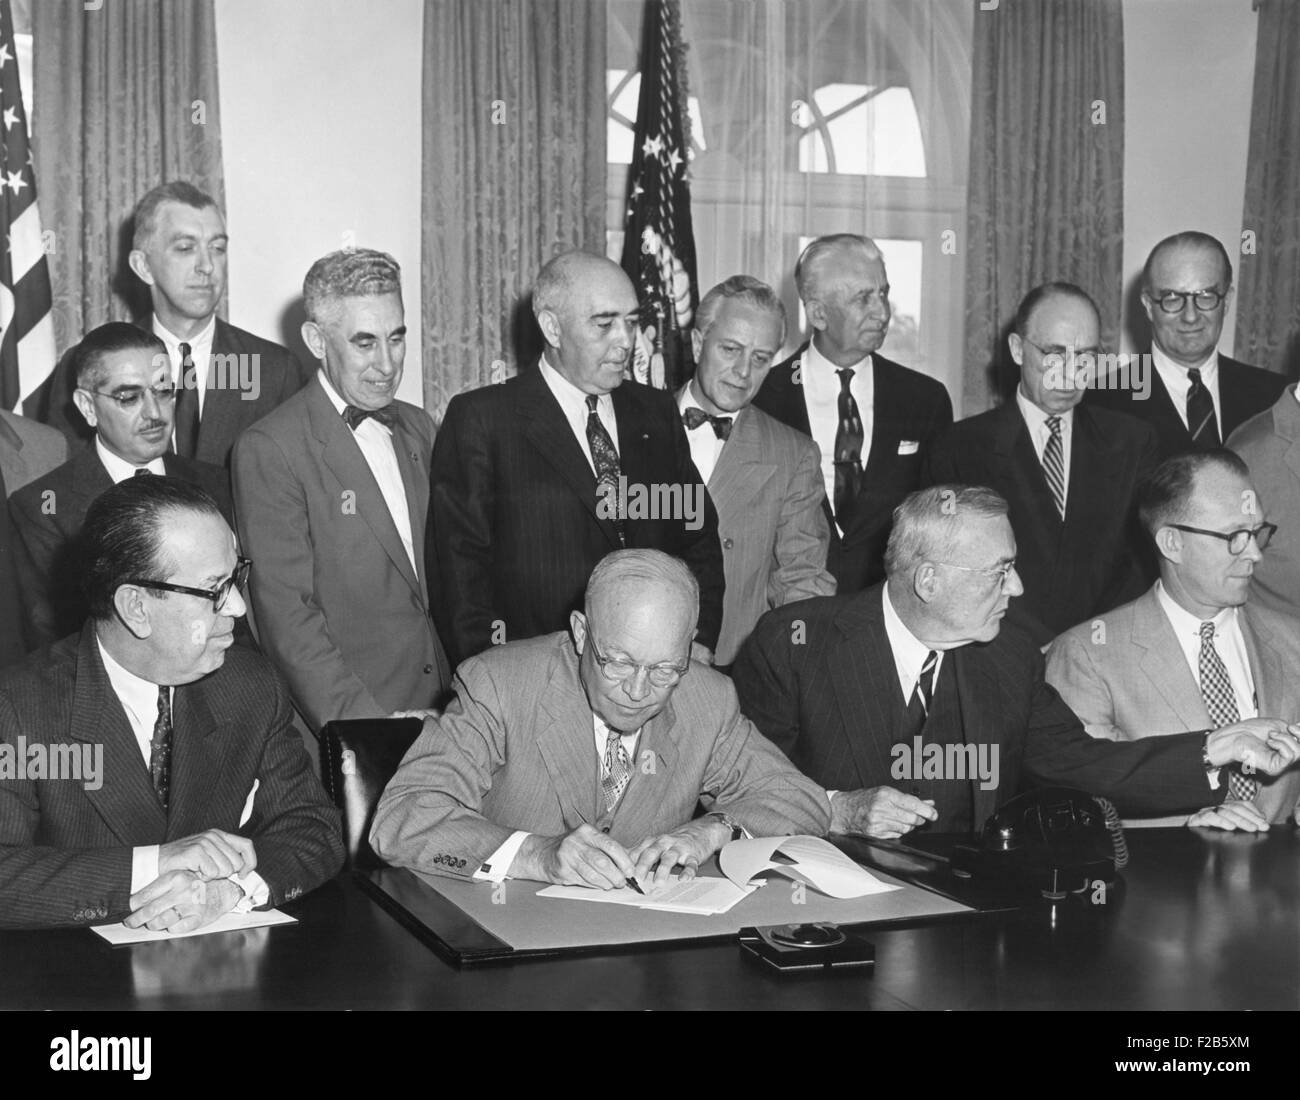 President Eisenhower initialing the first agreement for the Peaceful use of Atomic Energy. May 3, 1955. The international 'Atoms for Peace' program that supplied nuclear equipment to schools, hospitals, and research institutions throughout the world. Nuclear reactors in Iran and Pakistan were built under the program. - (BSLOC 2014 16 235) Stock Photo